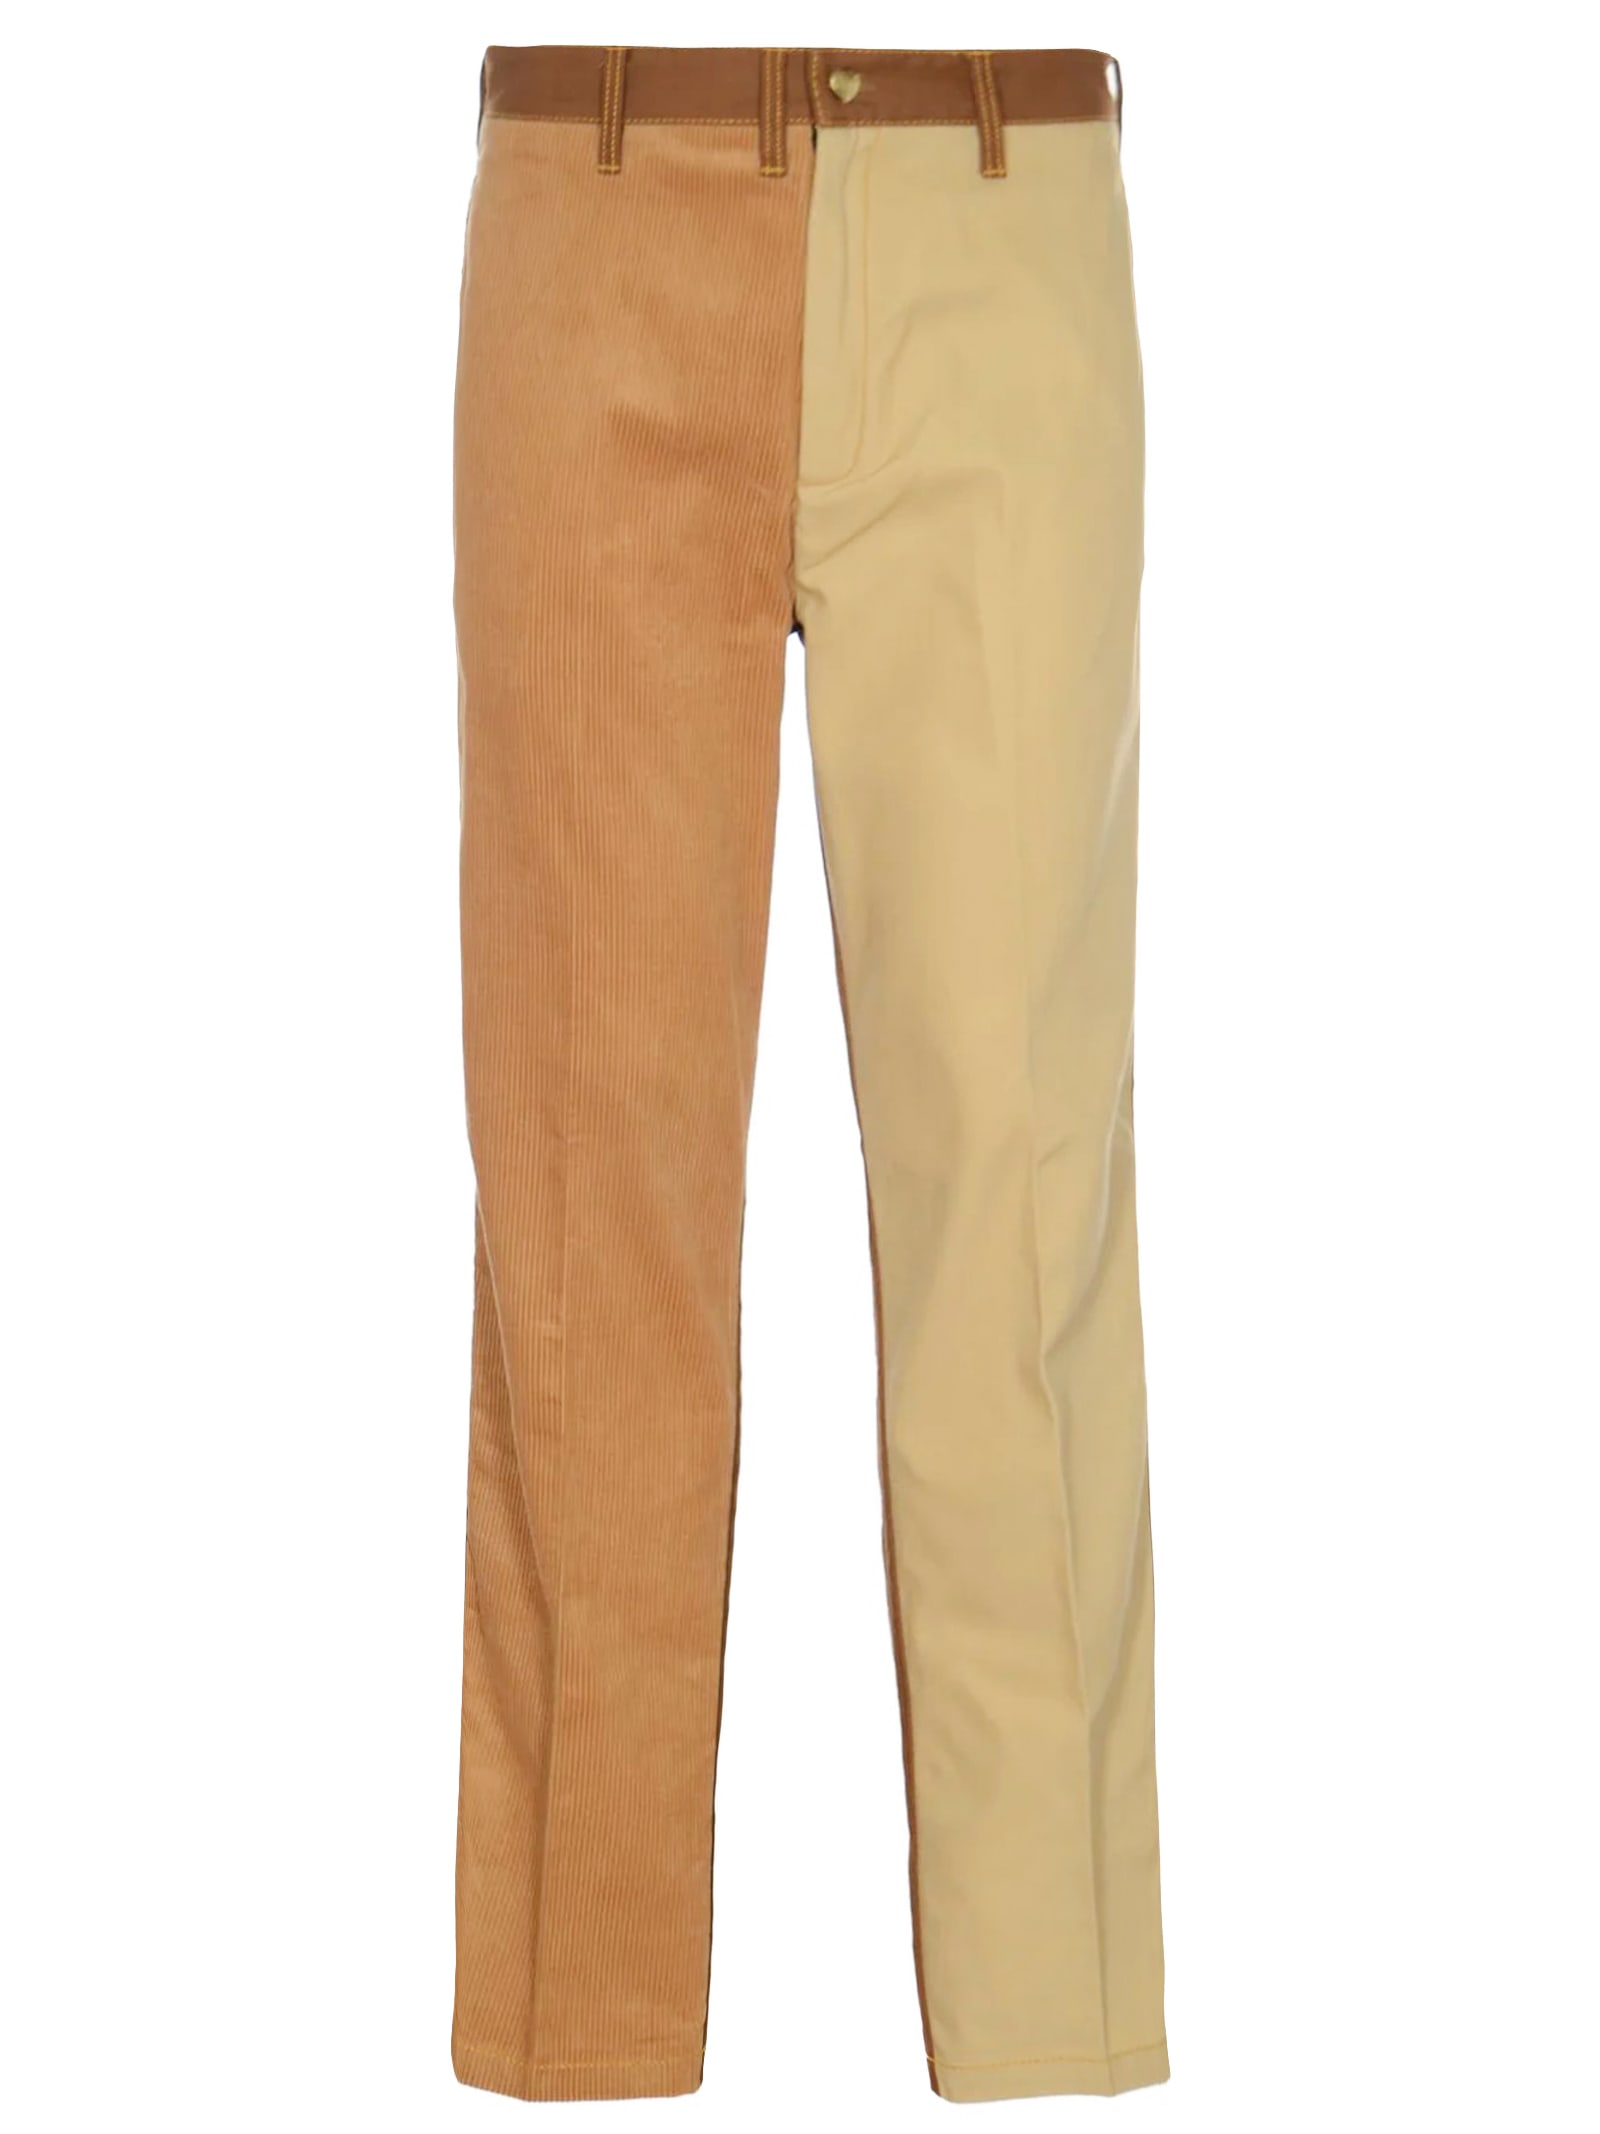 Marni Beige And Brown Cotton Trousers